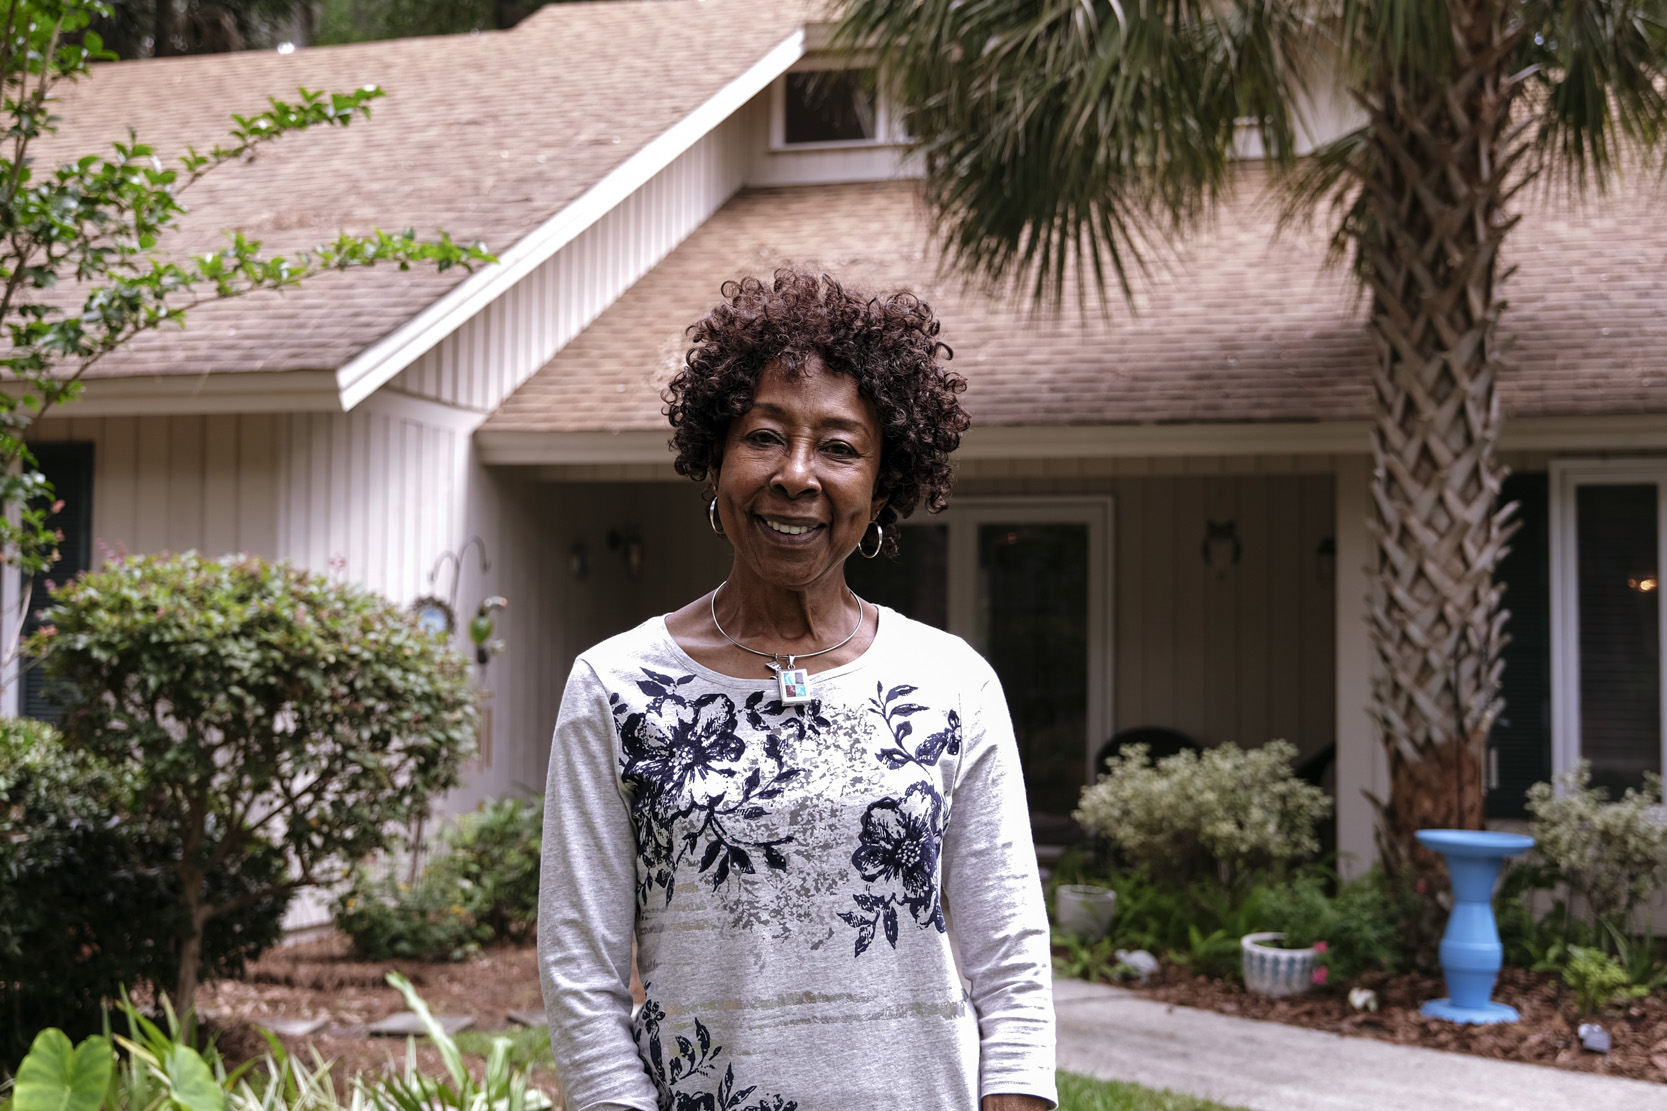 A woman smiling in front of a house with palm trees.